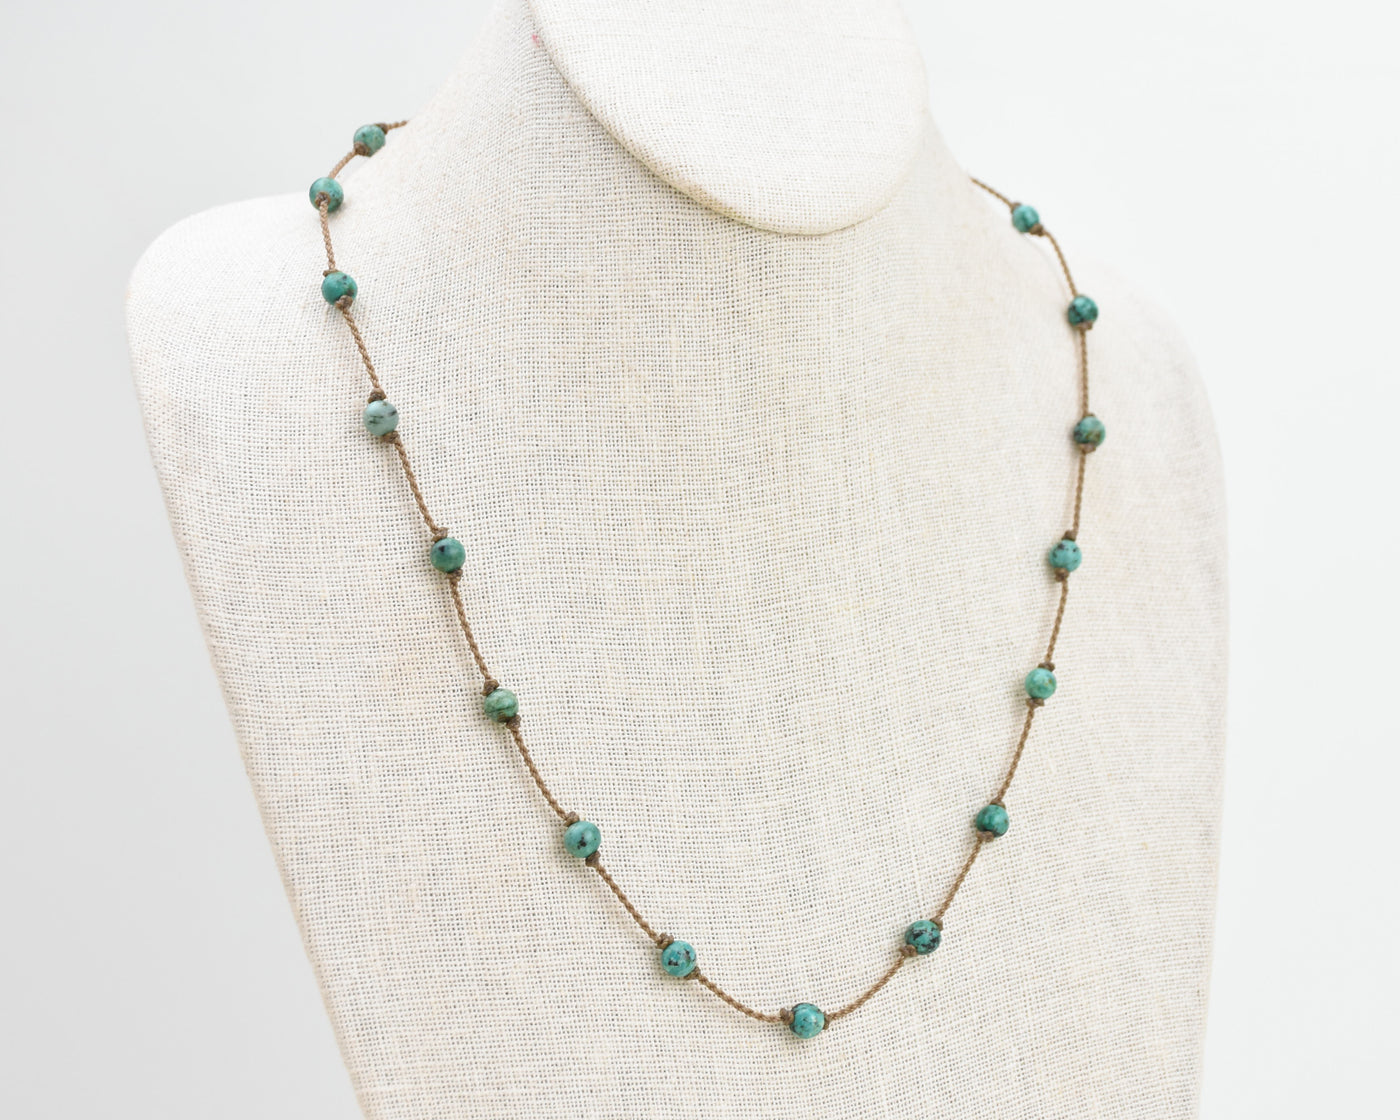 Wrap-1030-African Turquoise Round Petite